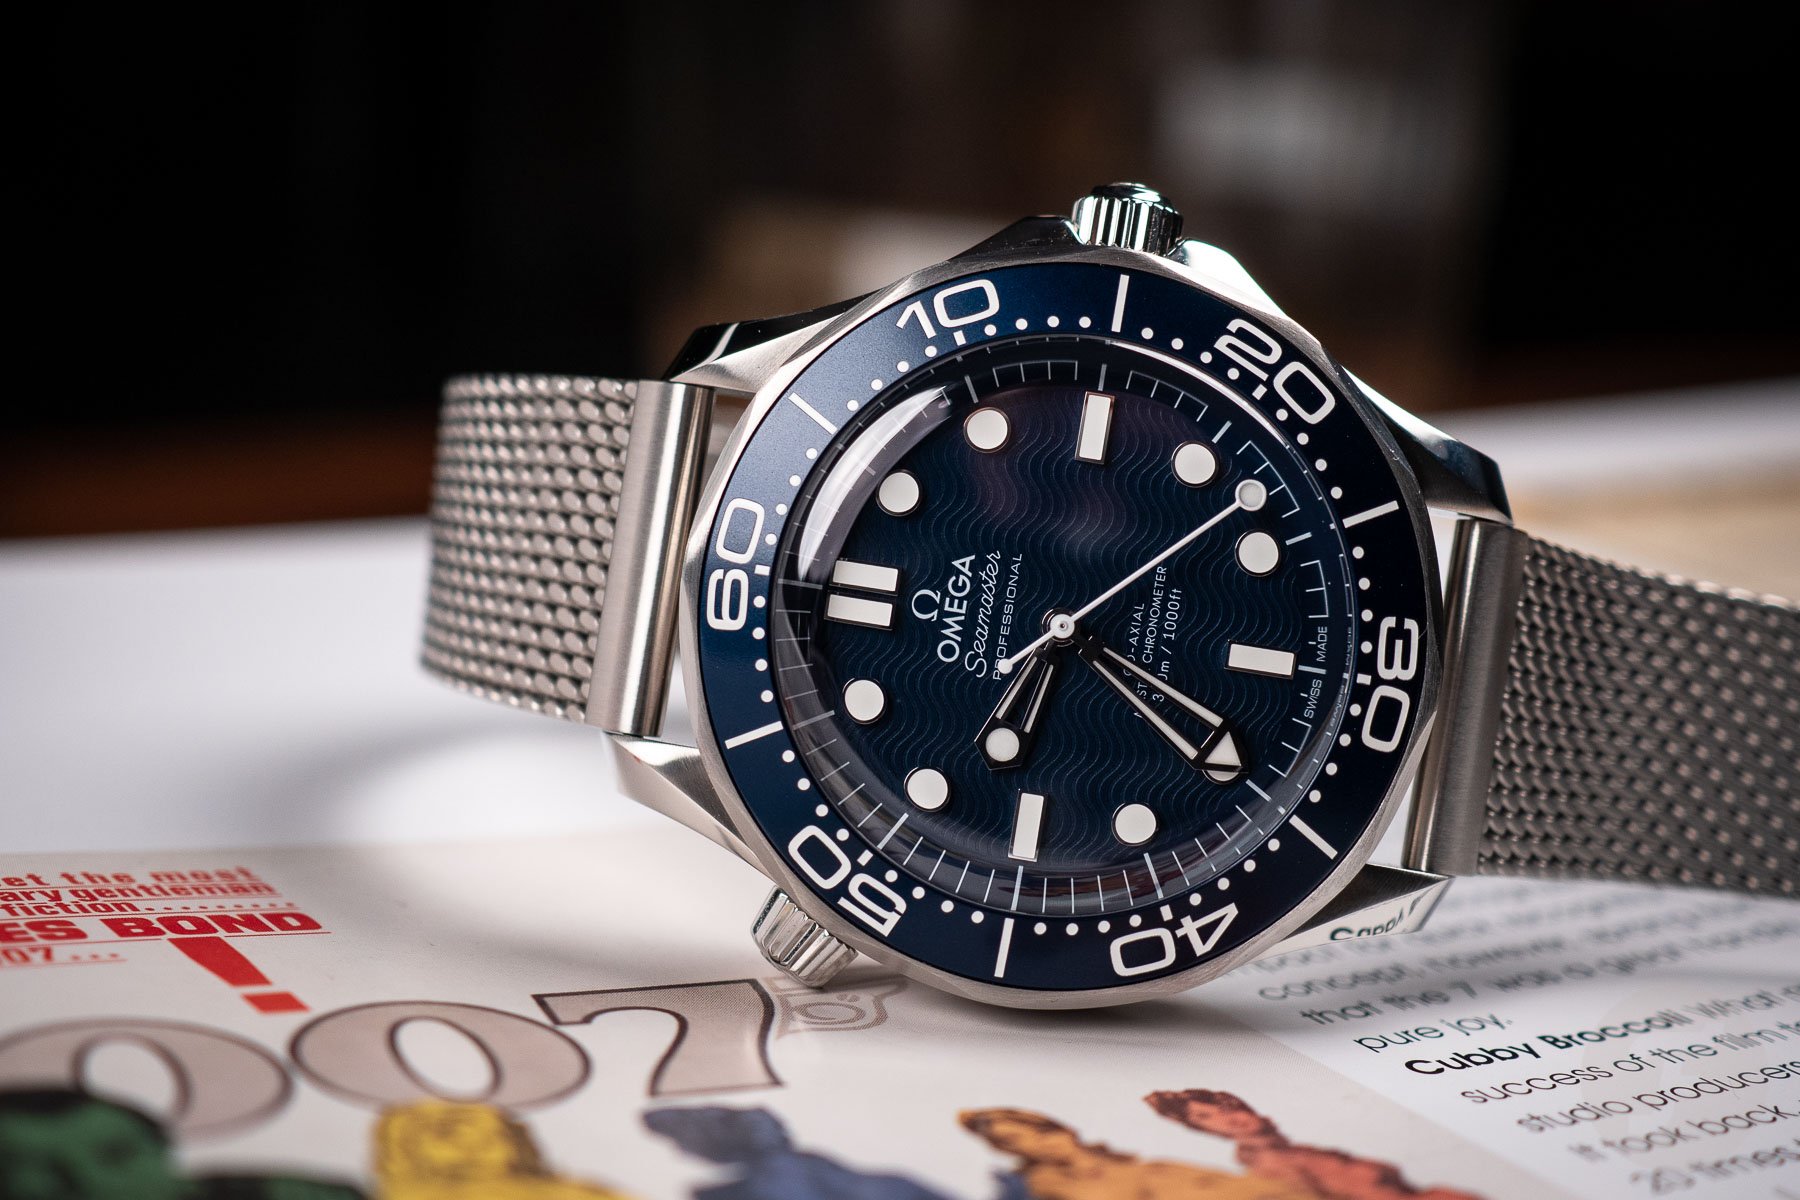 James Bond's next watch could be from this Omega Seamaster collection